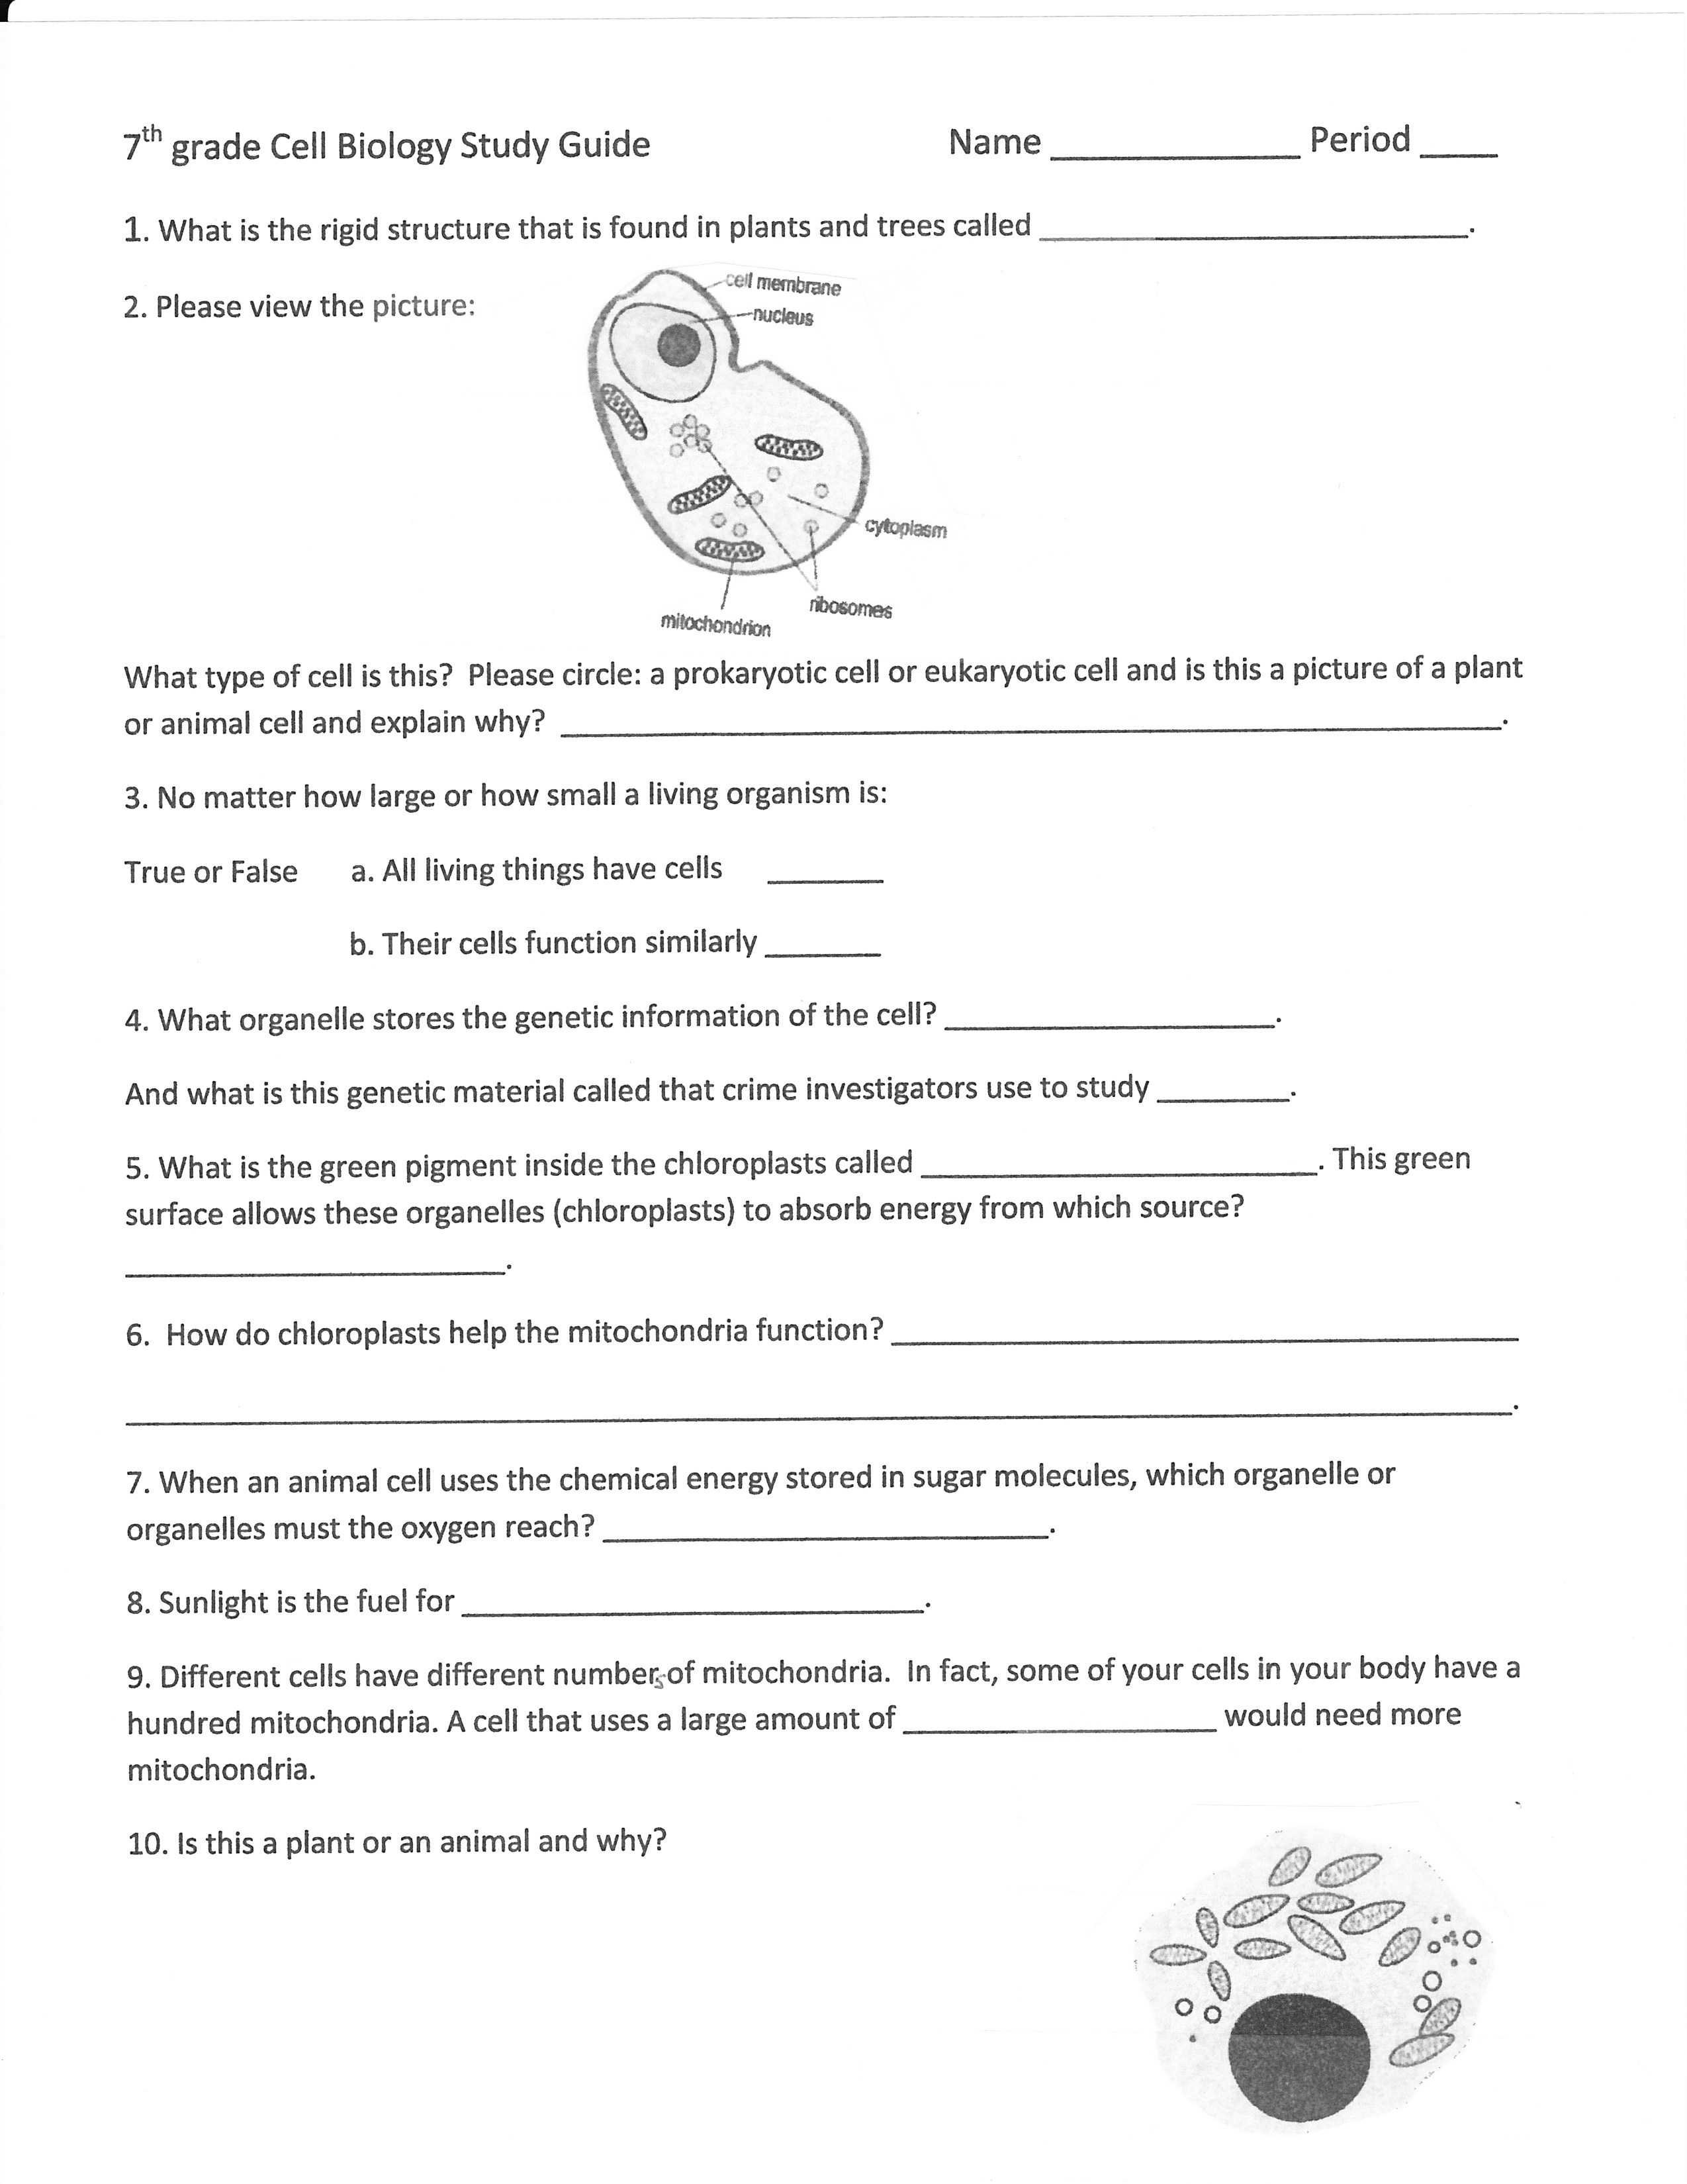 7th Grade Science Cells Worksheets Image